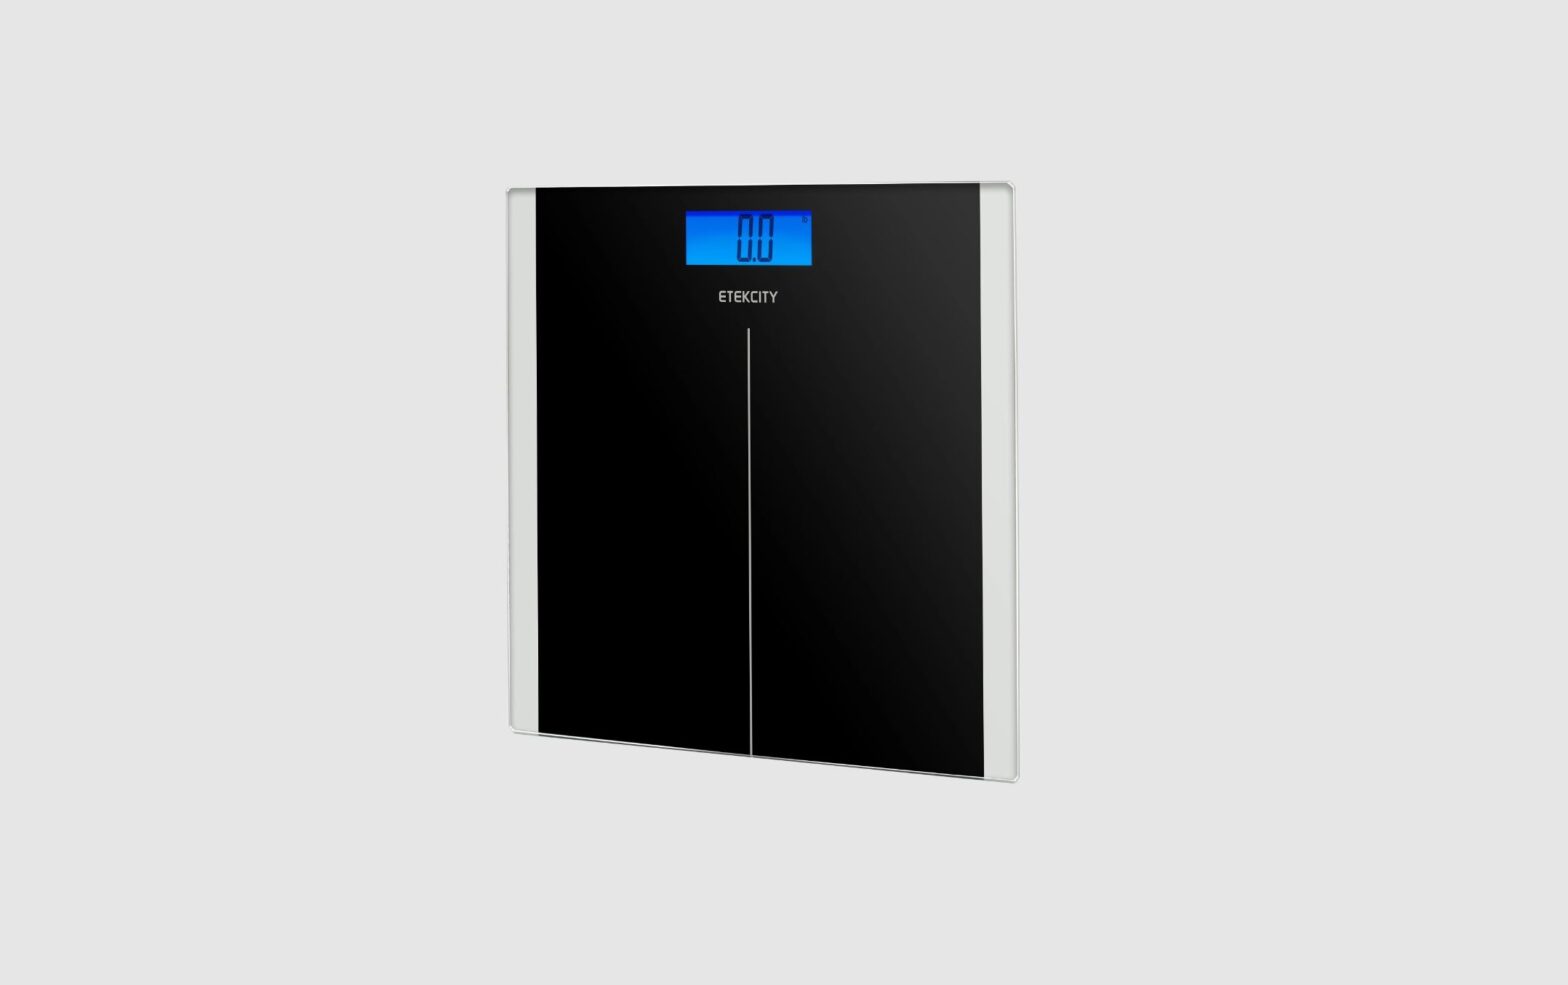 Etekcity EB9380H Digital Body Weight Scale with Step-On Technology User Manual - Featured image